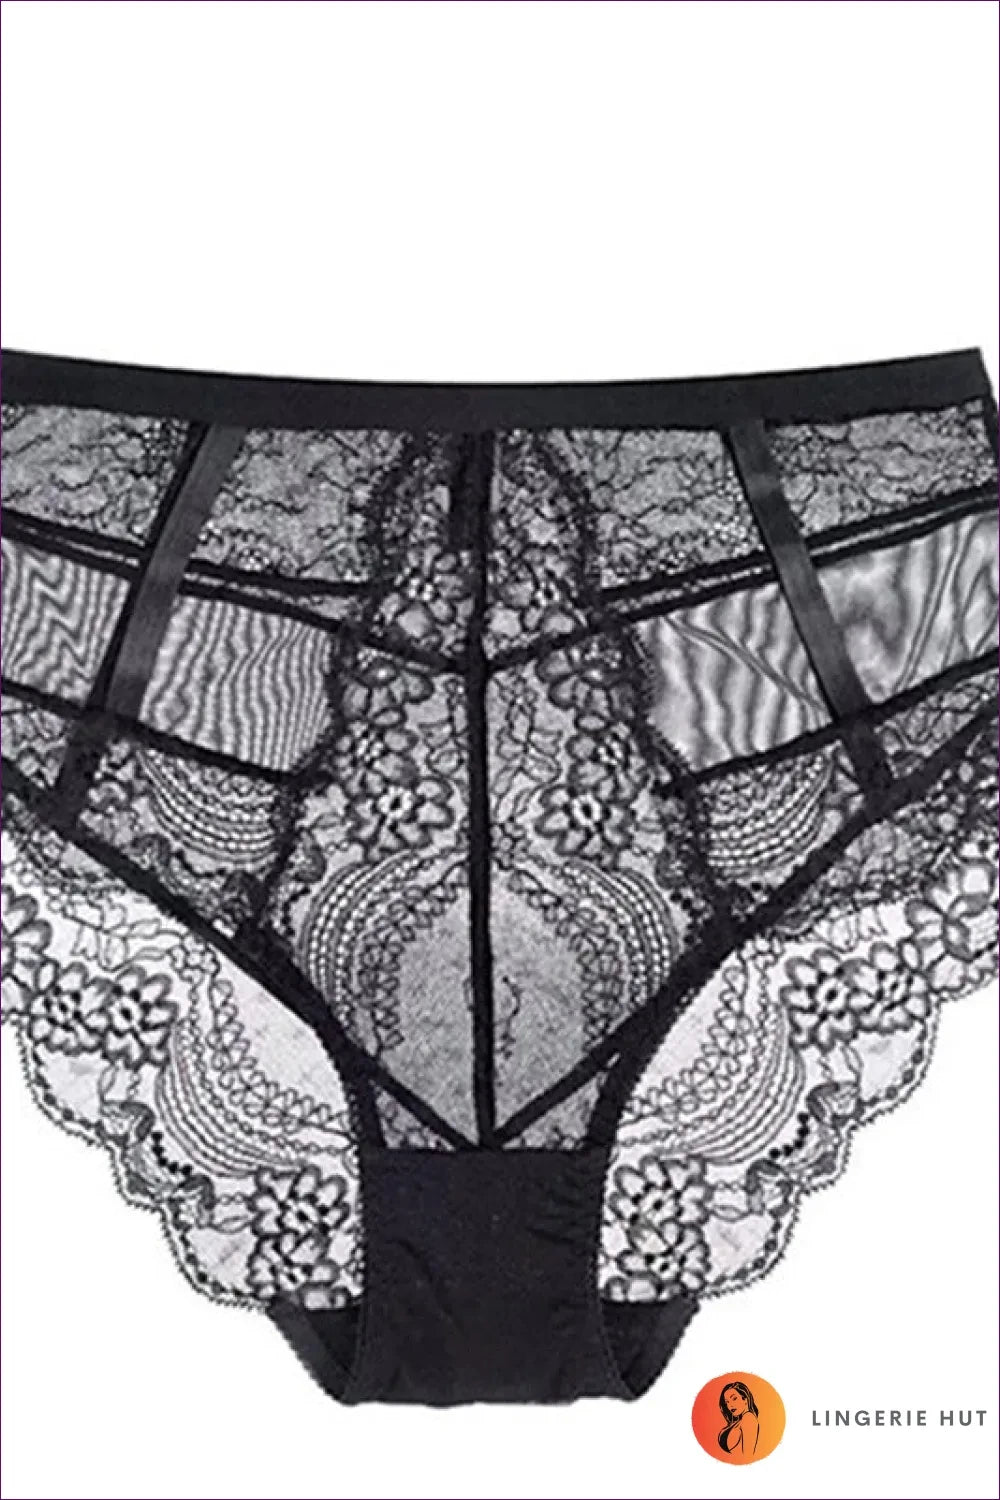 Experience The Perfect Blend Of Comfort And Style With Our High Waist Mesh Lace Trim Full Brief. Smooth,